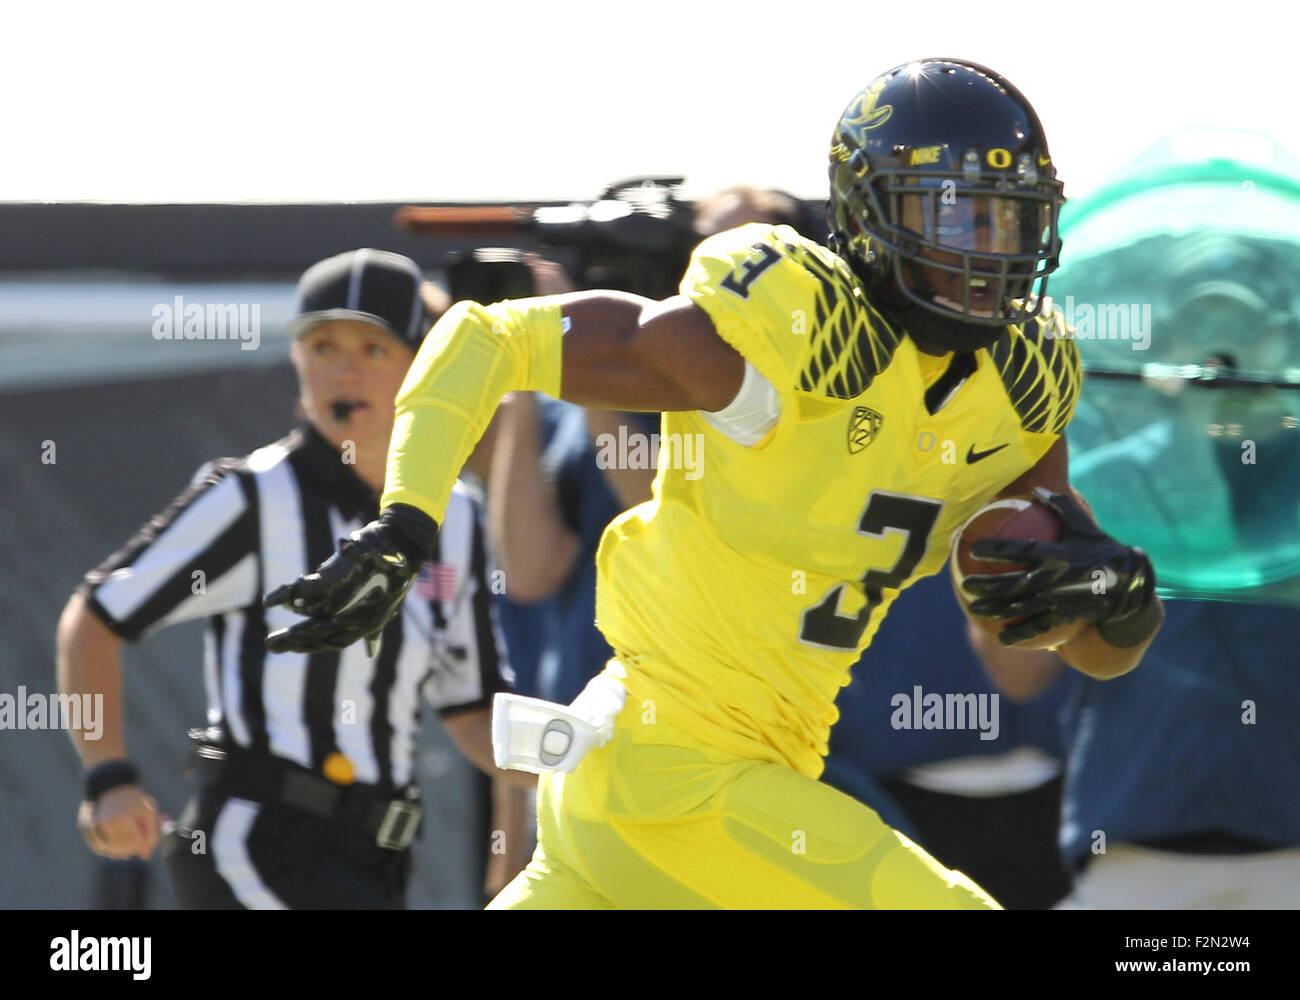 Autzen Stadium, Eugene, OR, USA. 19th Sep, 2015. Oregon Ducks safety Tyree Robinson (3) sprints down the sideline for a gain during the NCAA football game between the Ducks and the Georgia State Panthers at Autzen Stadium, Eugene, OR. Larry C. Lawson/CSM/Alamy Live News Stock Photo